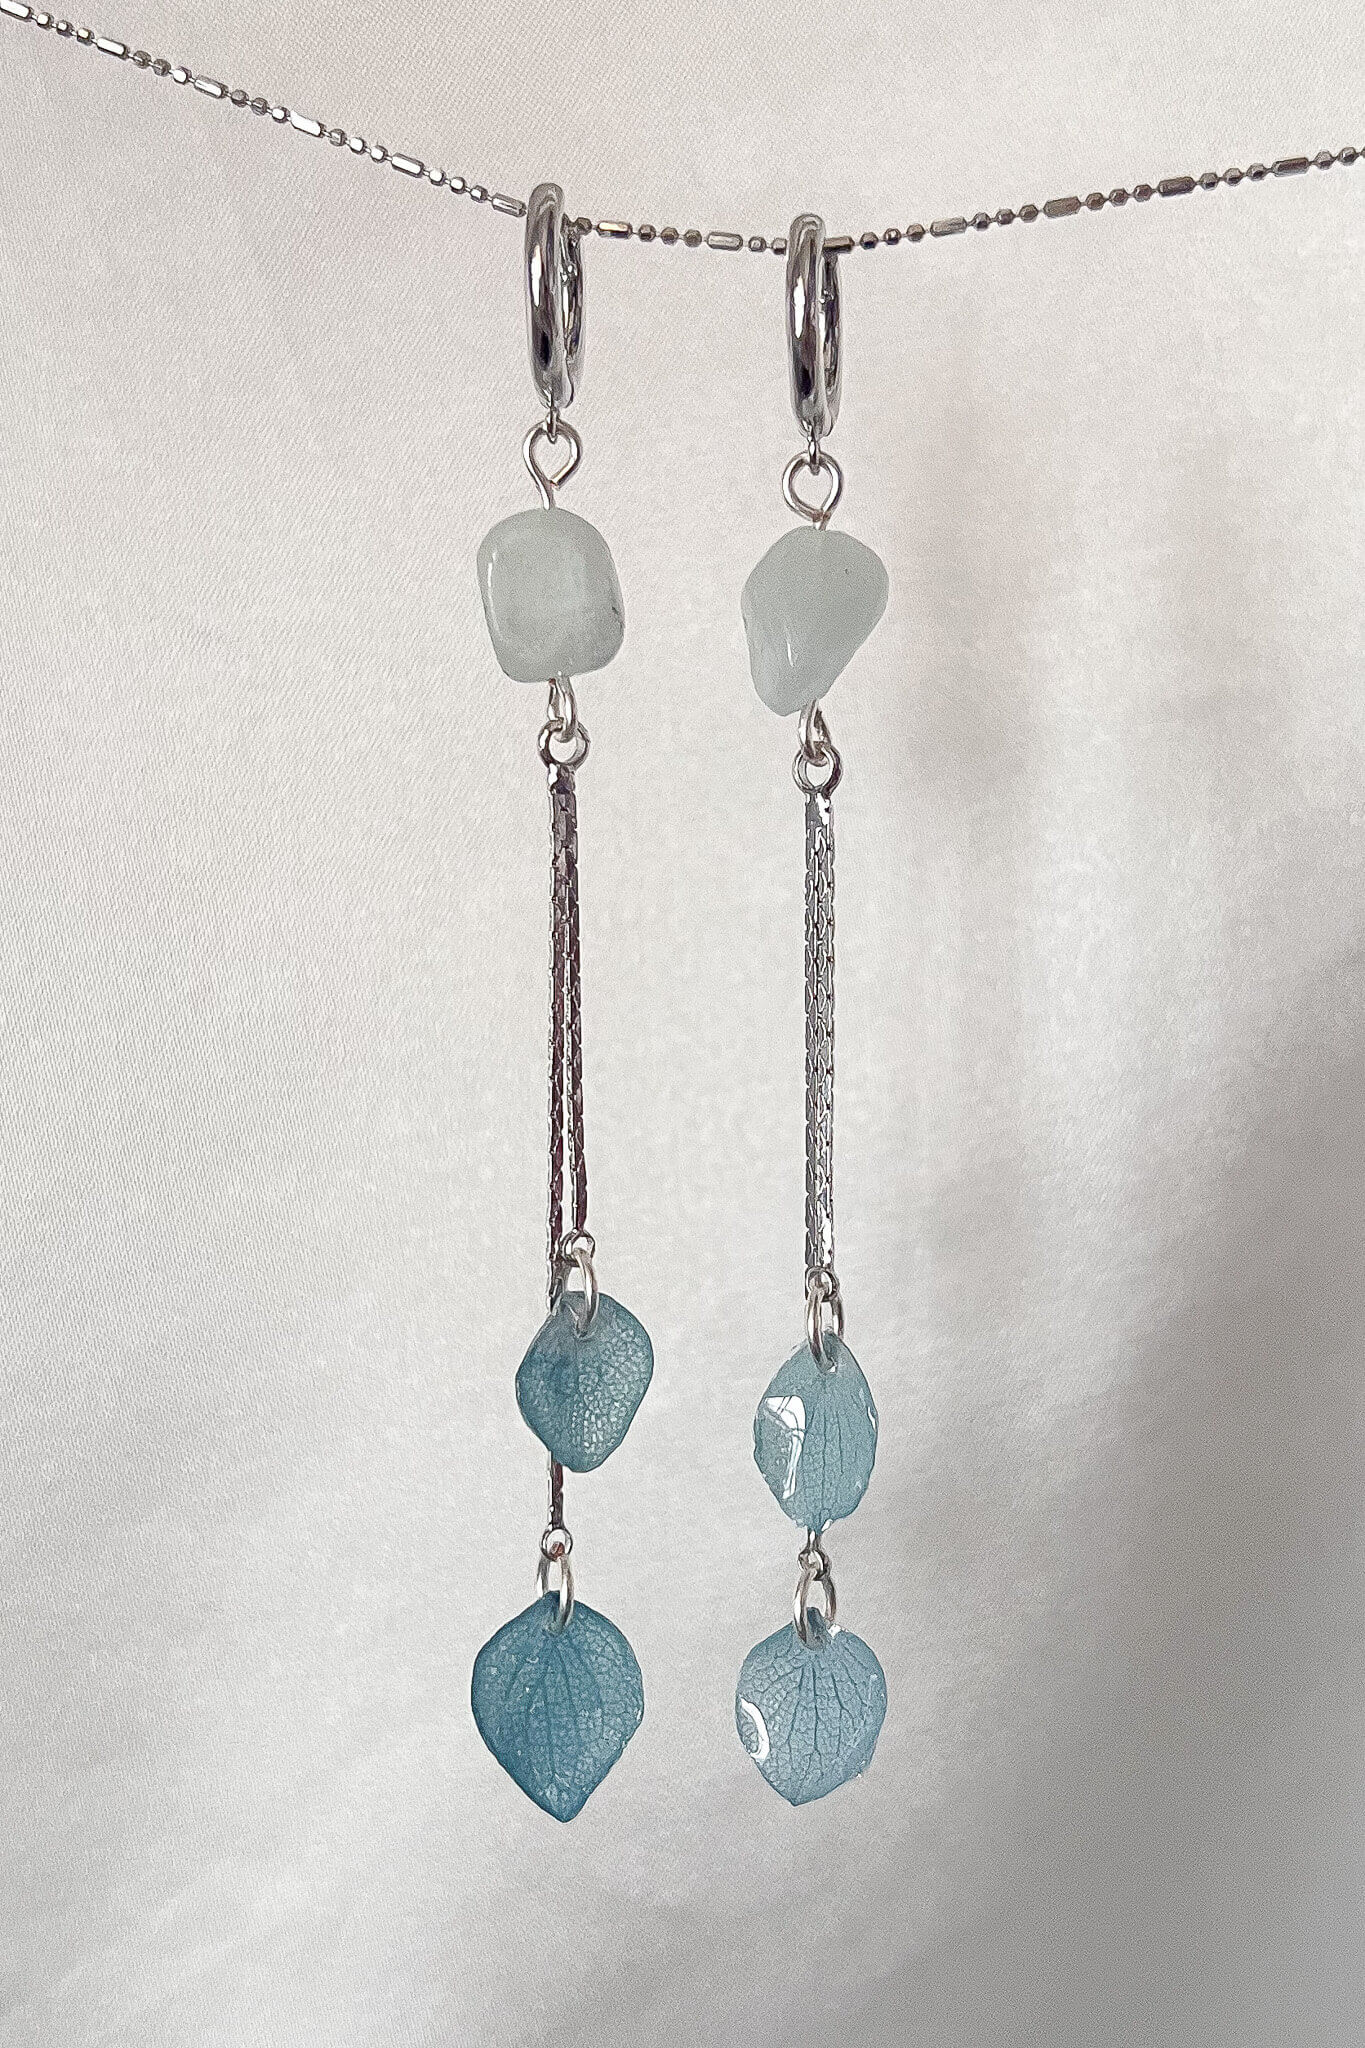 These earrings feature a crystal piece and delicately dangling preserved hydrangea petals, making them the perfect combination of simple elegance. These earrings will add a unique touch to any look! Silver hardware 